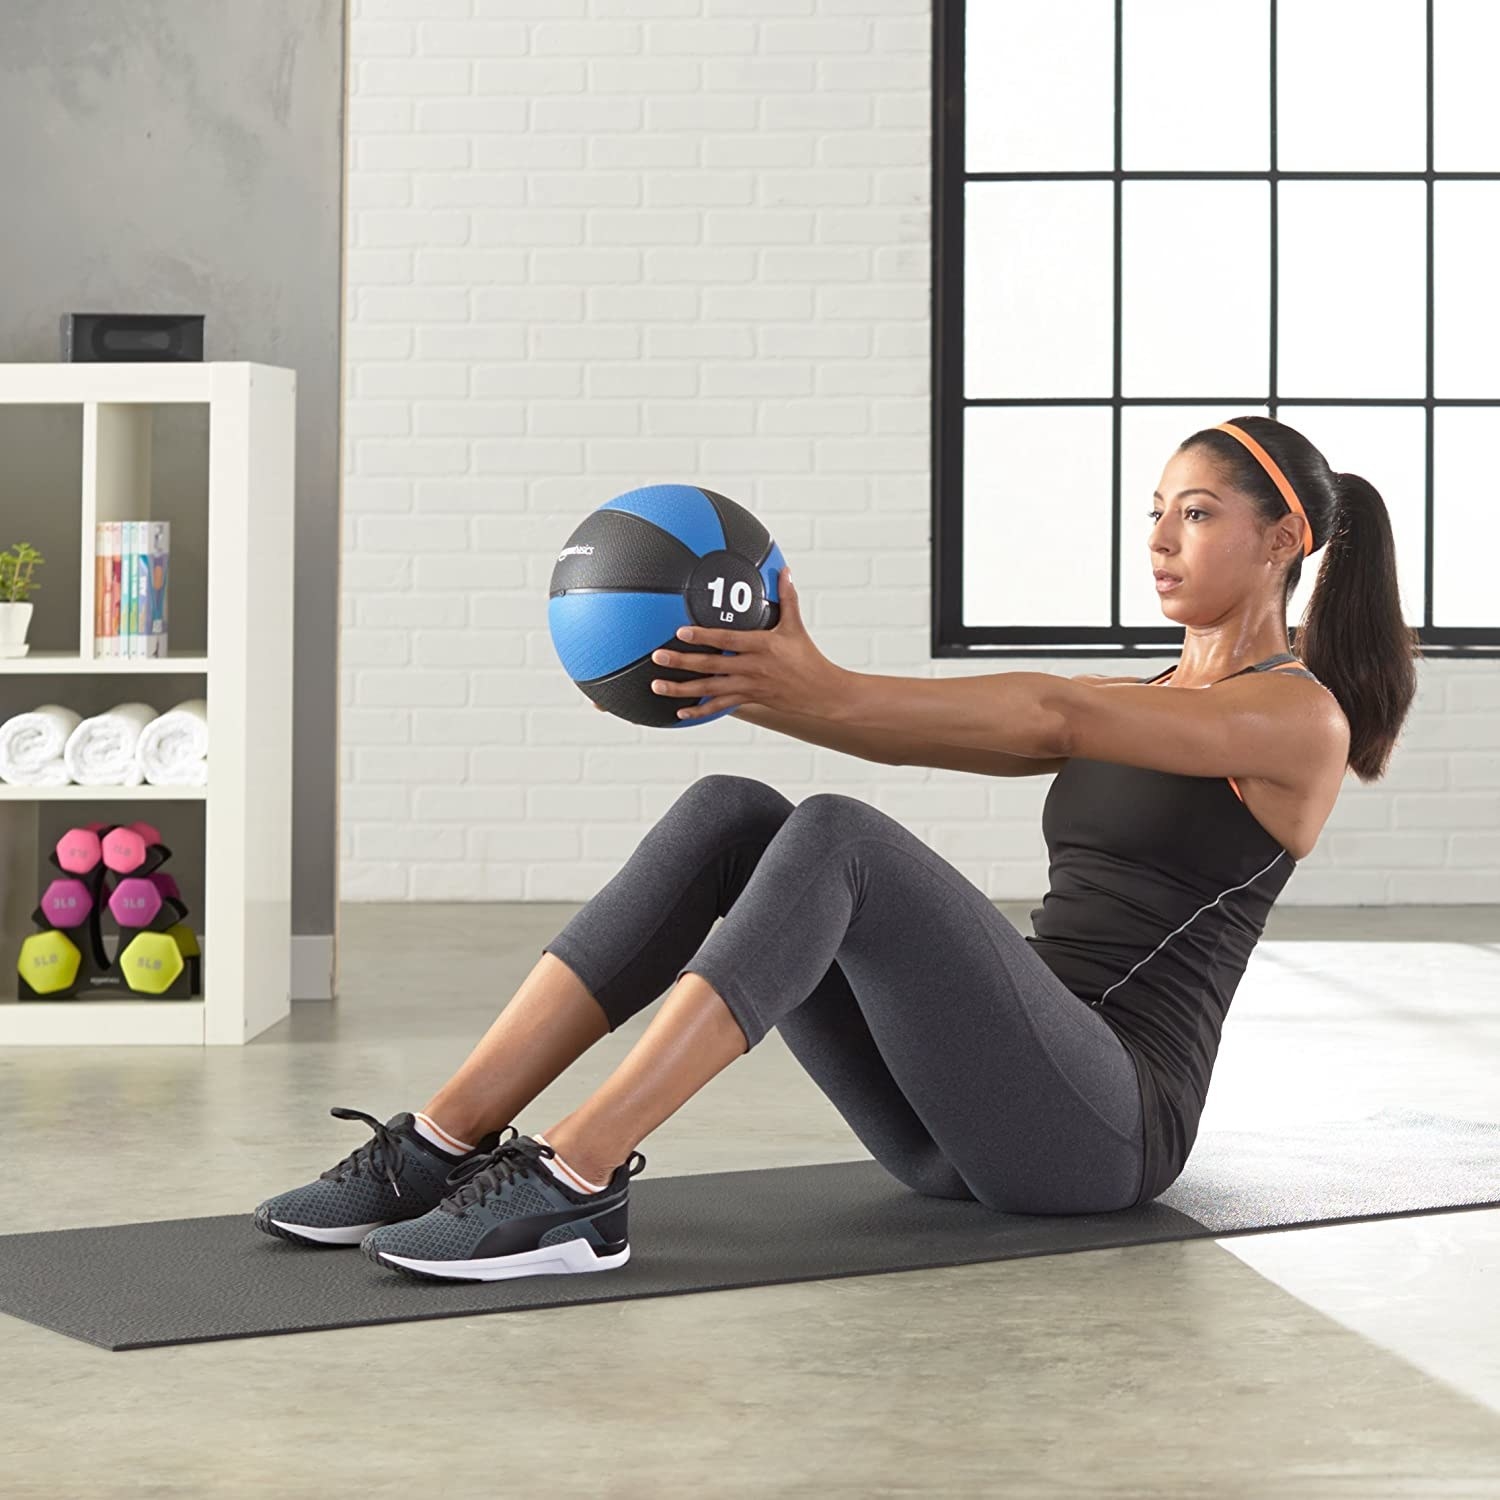 A model using the blue and black medicine ball